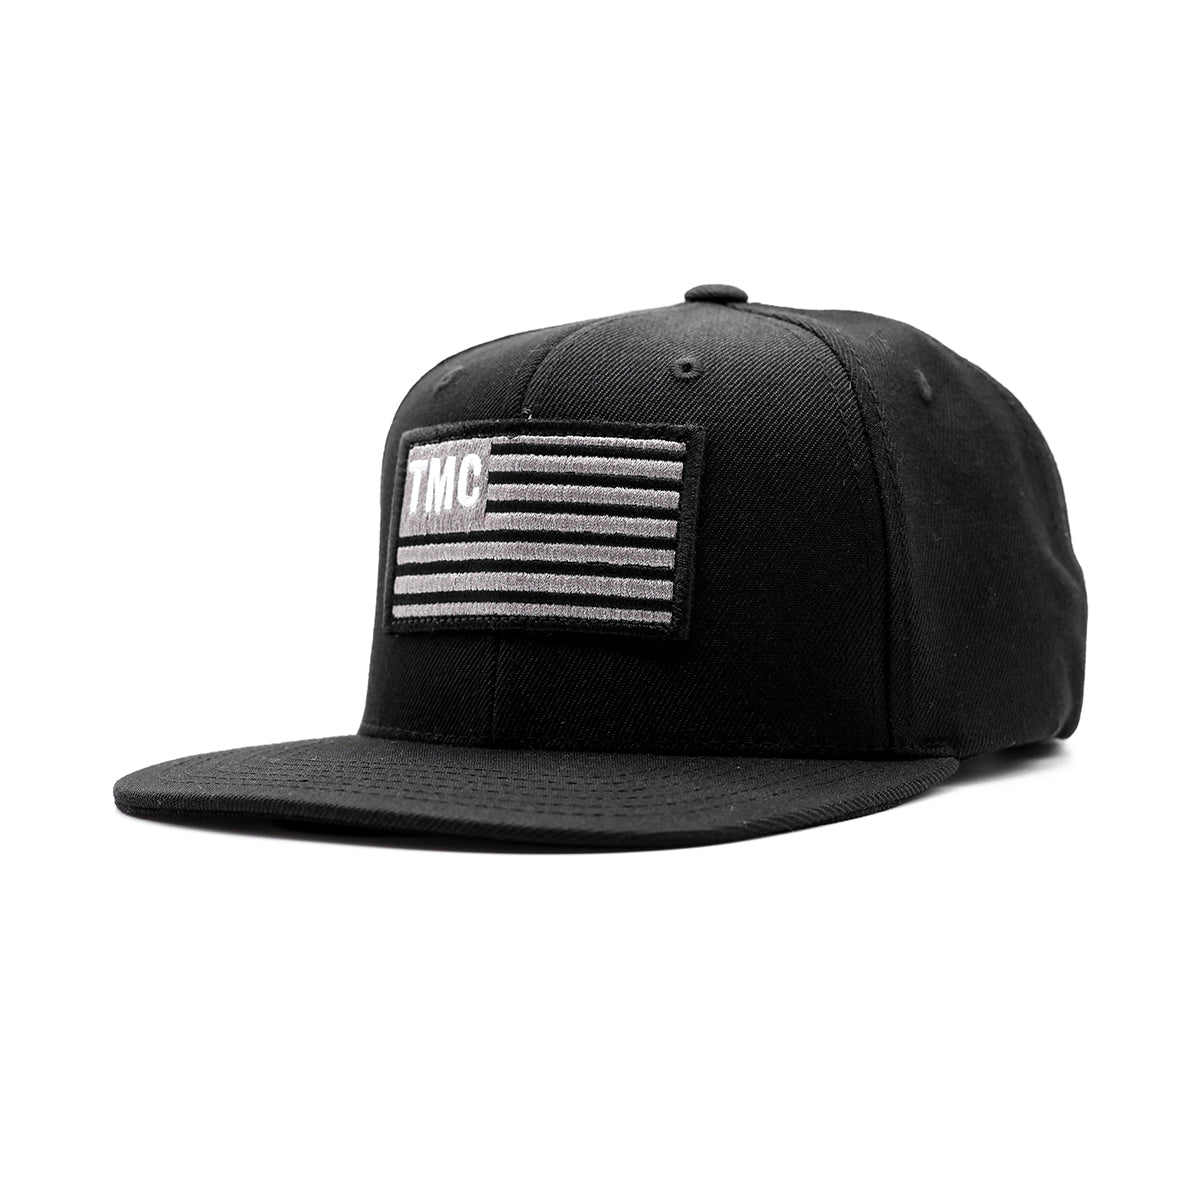 TMC Flag Patch Limited Edition Snapback - Black/White - Angle